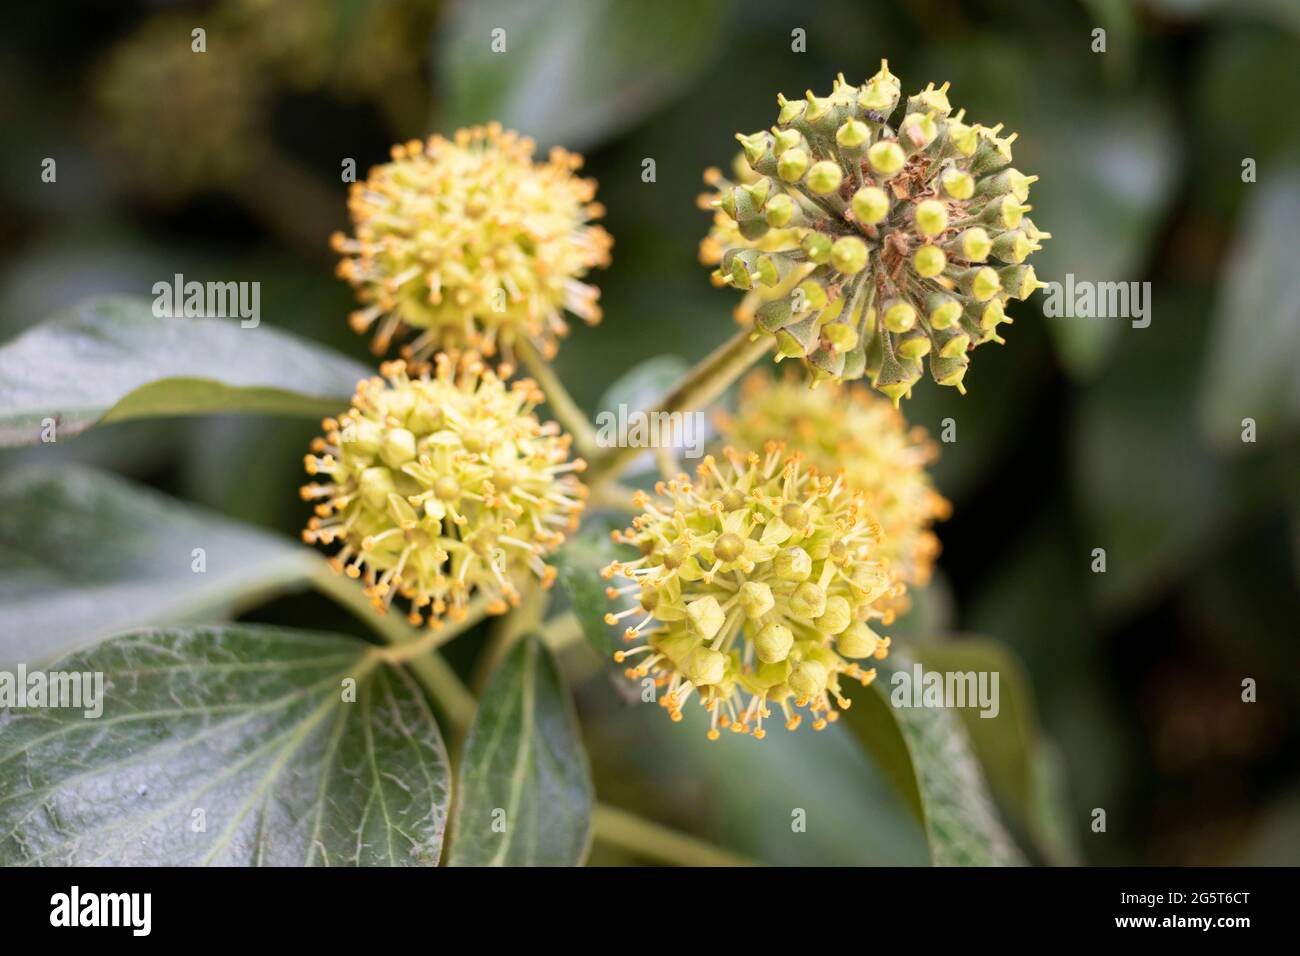 English ivy, common ivy (Hedera helix), blooming, Germany Stock Photo